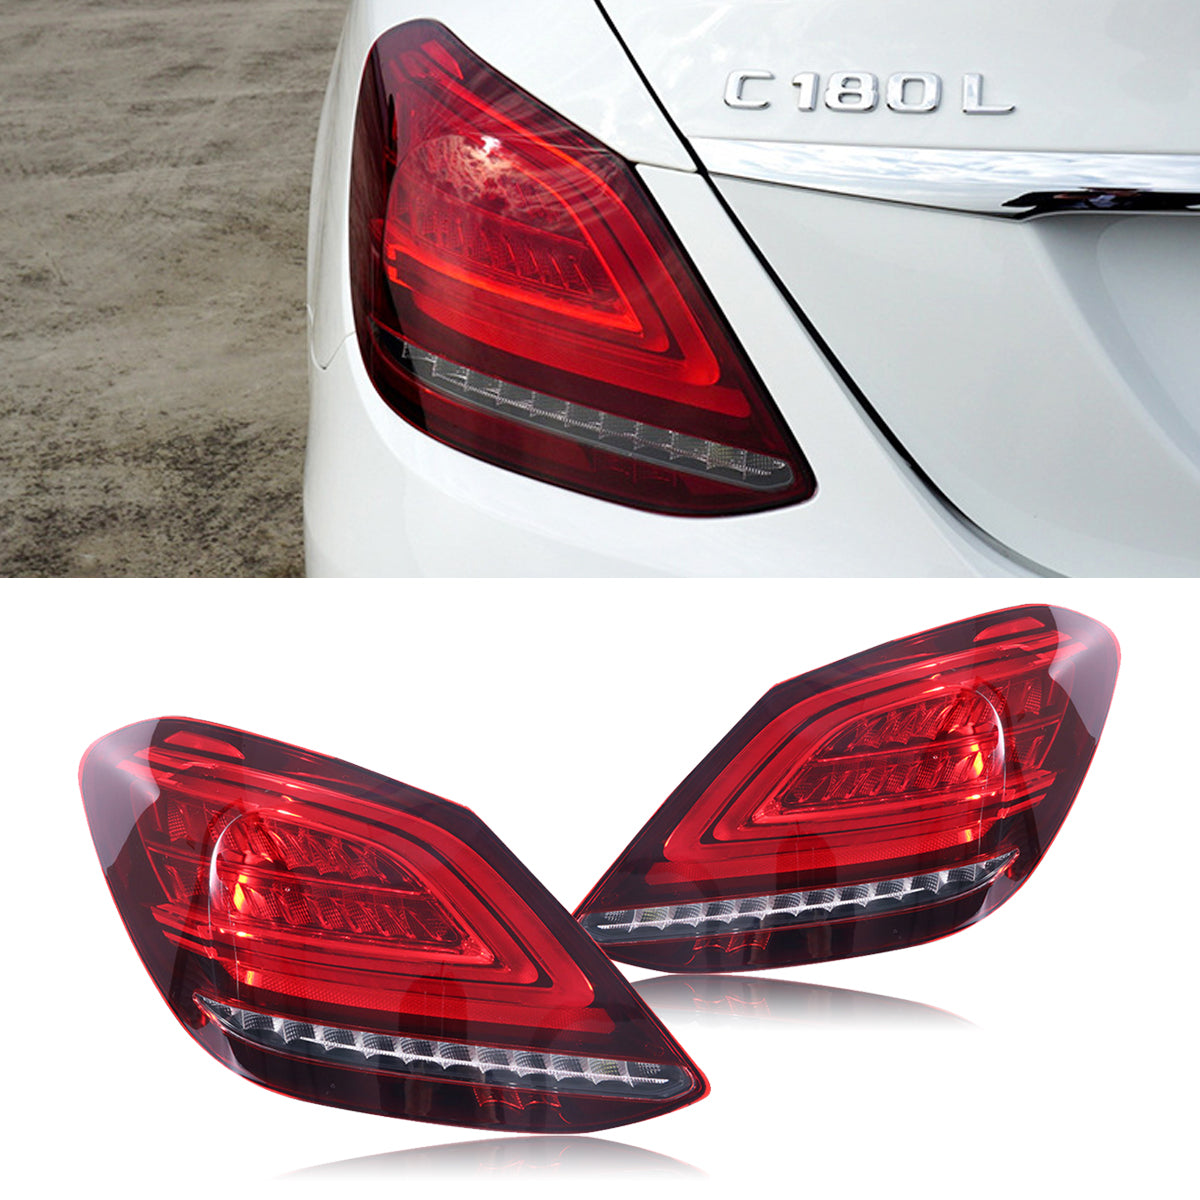 The taillight for W205 2019